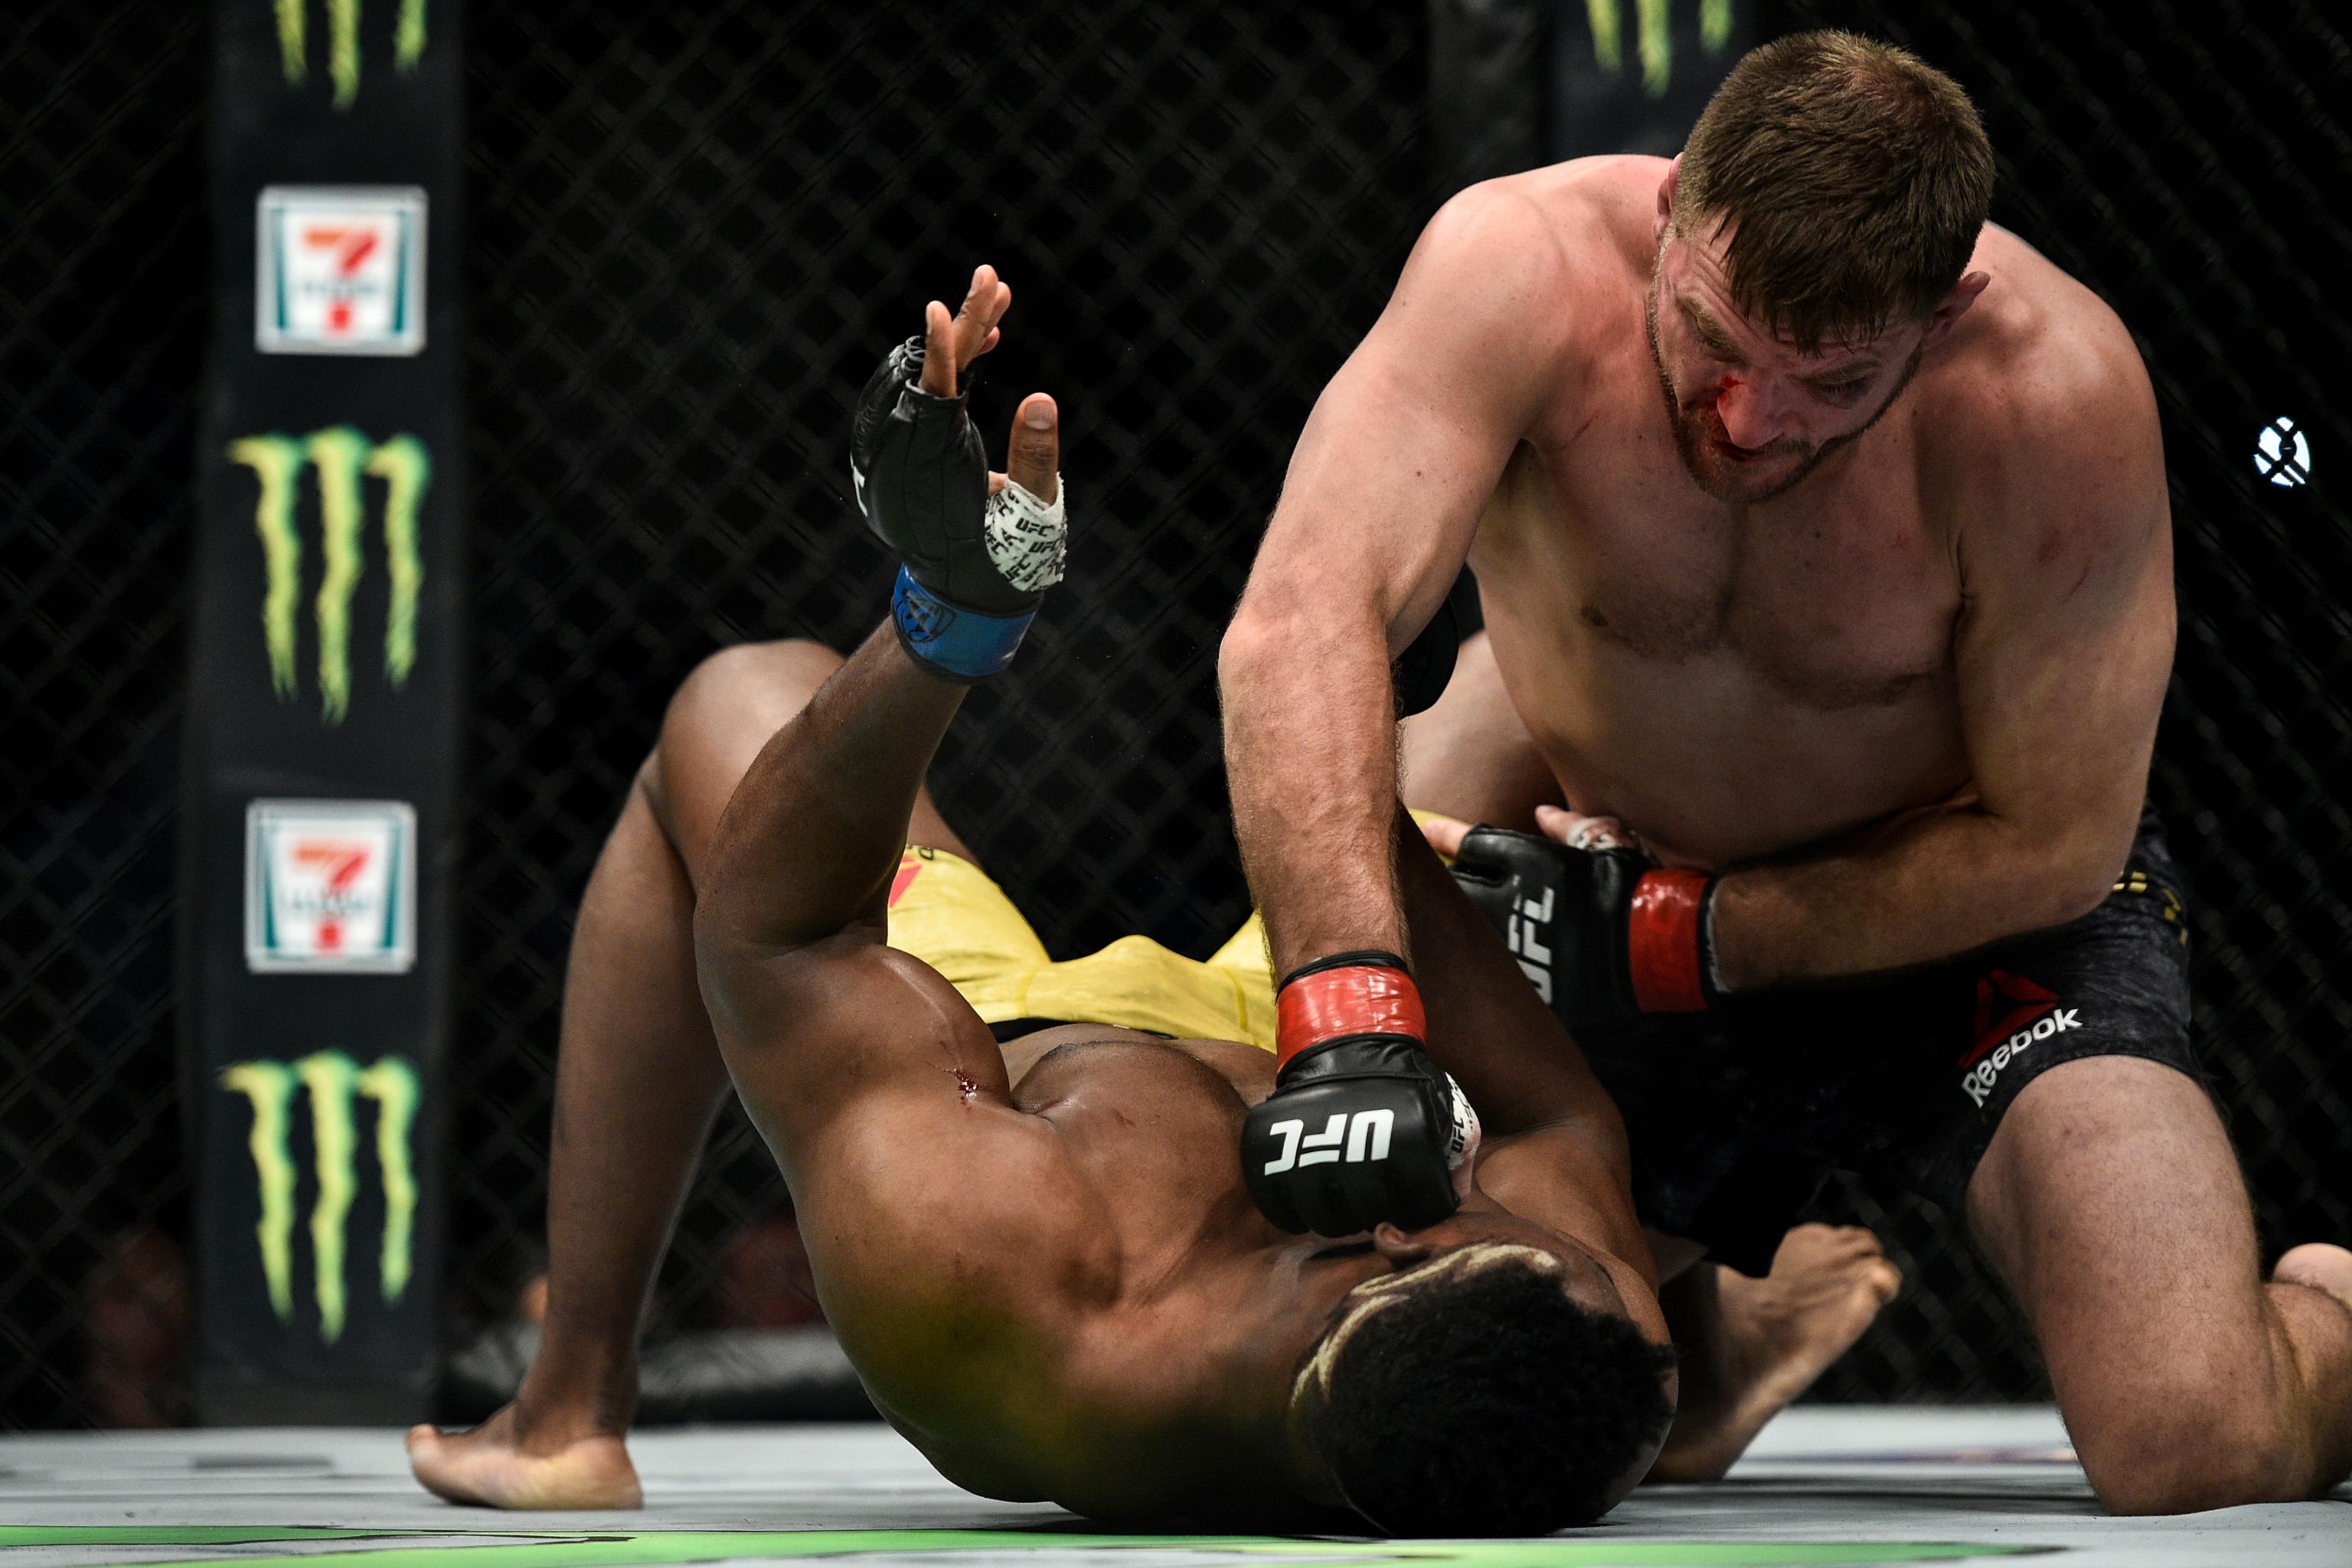 How many times has Stipe fought Ngannou?